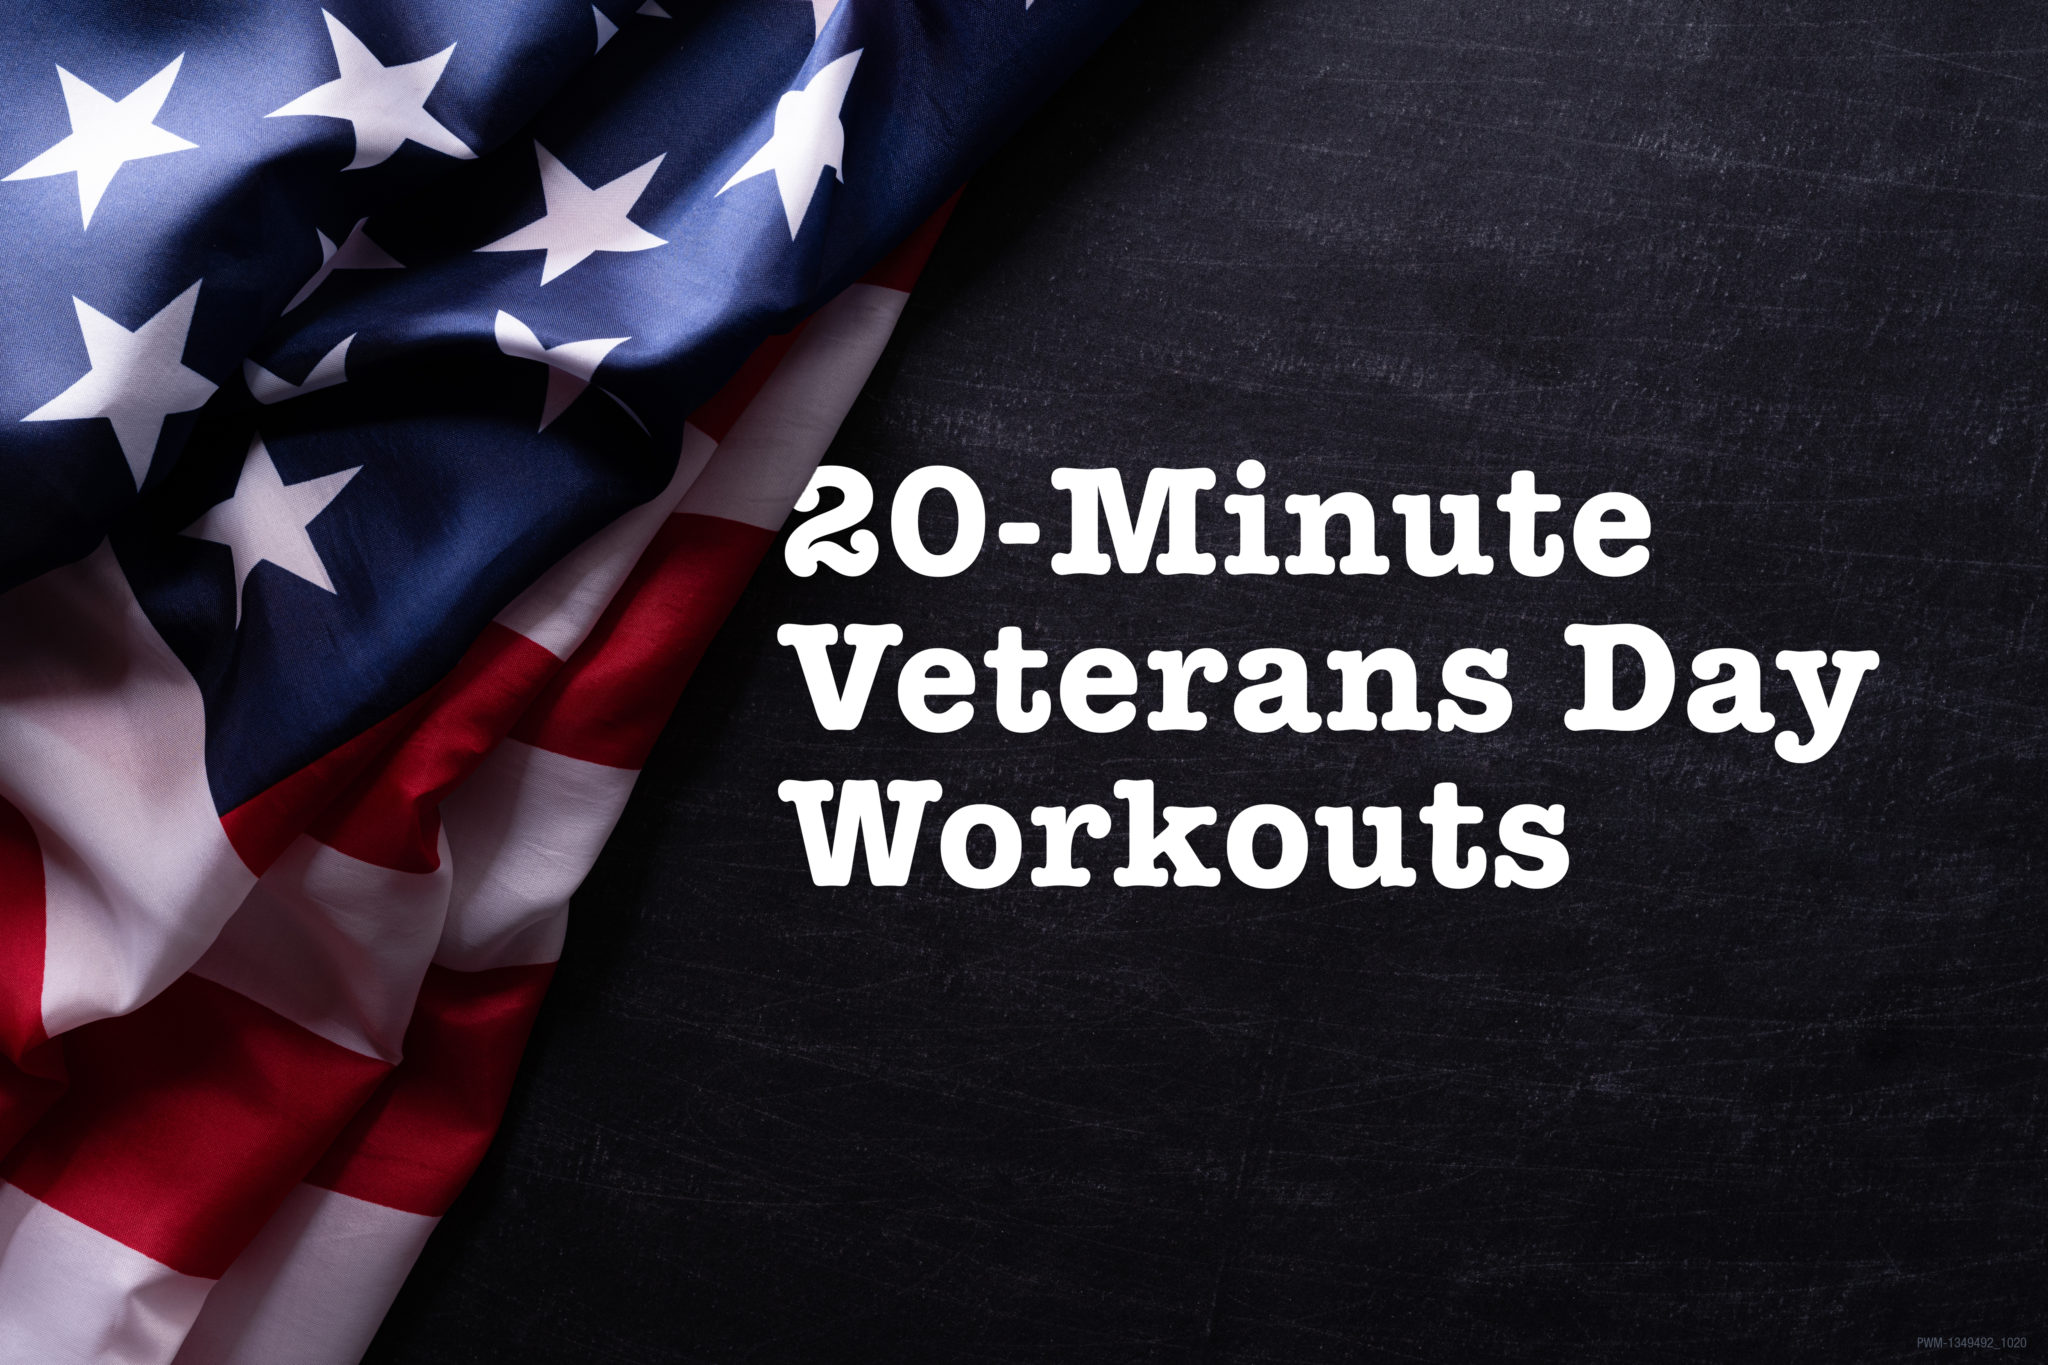 6 Day Is fitness 19 open on veterans day 